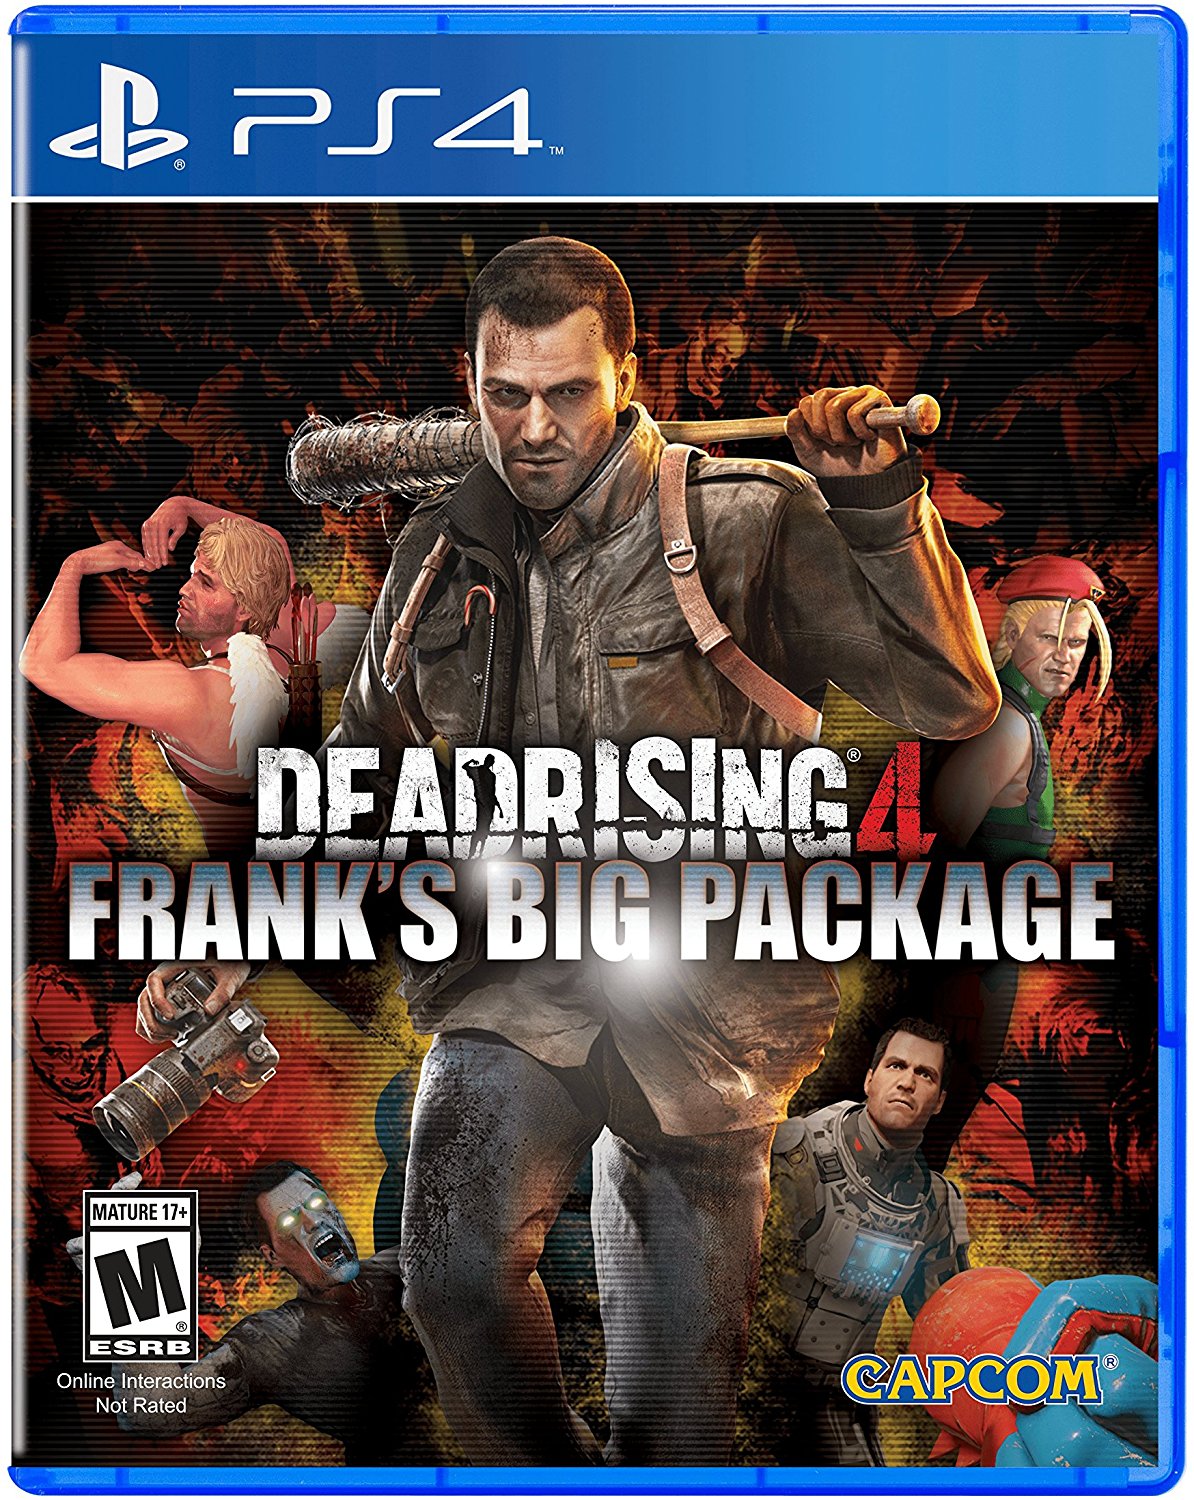 Dead Rising 4 Franks Big Package - PS4 title=Dead Rising 4 Franks Big Package - PS4